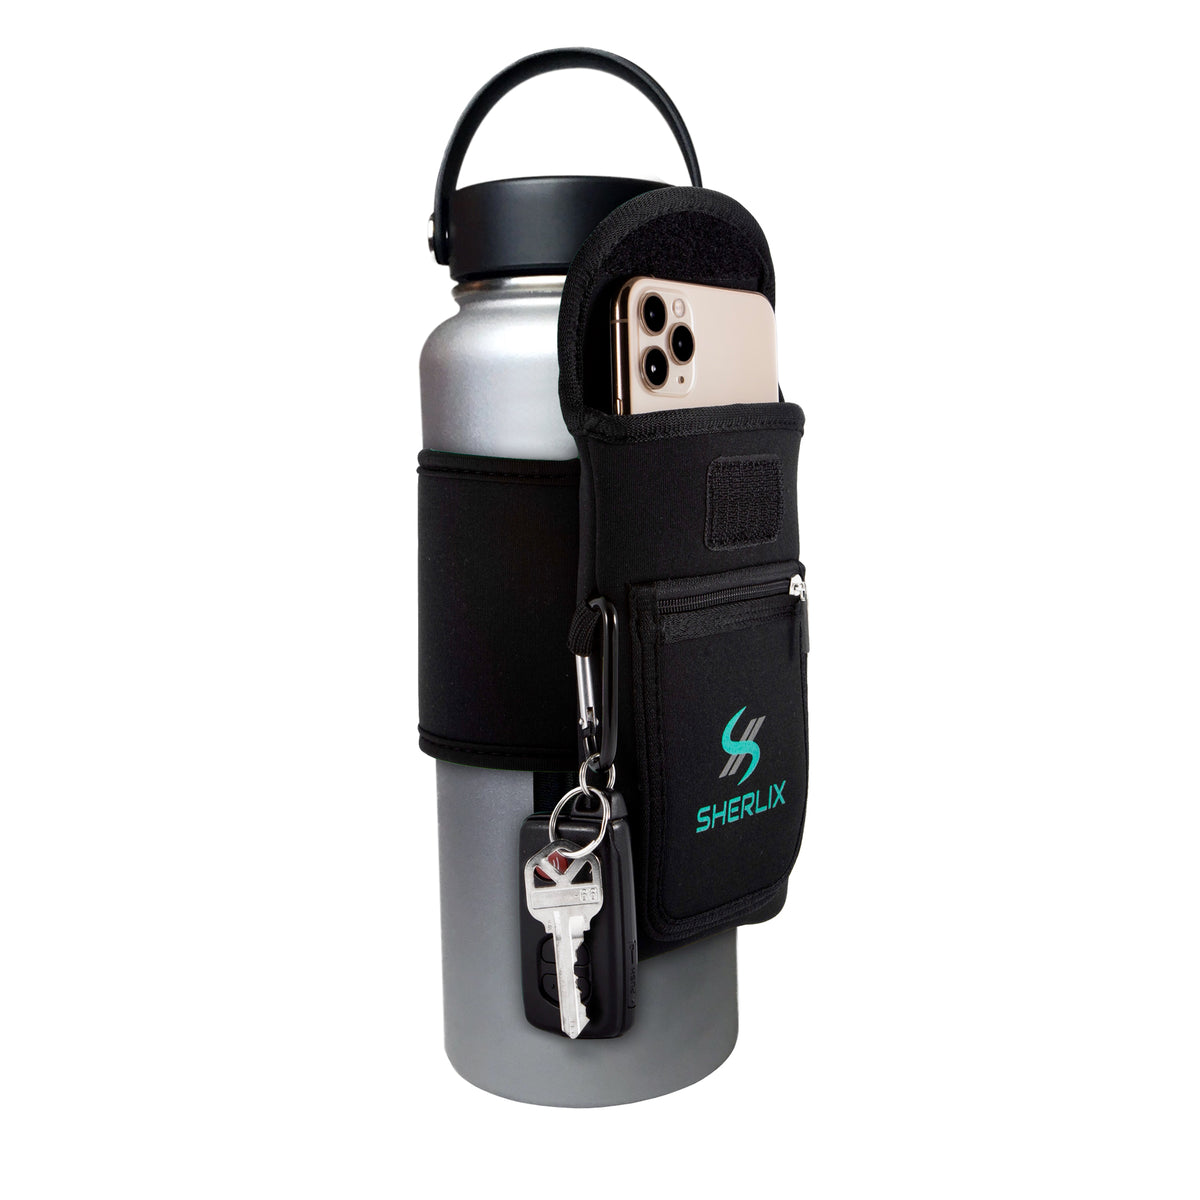 Xxerciz Water Bottle Carrier with Phone Pocket for Simple Modern